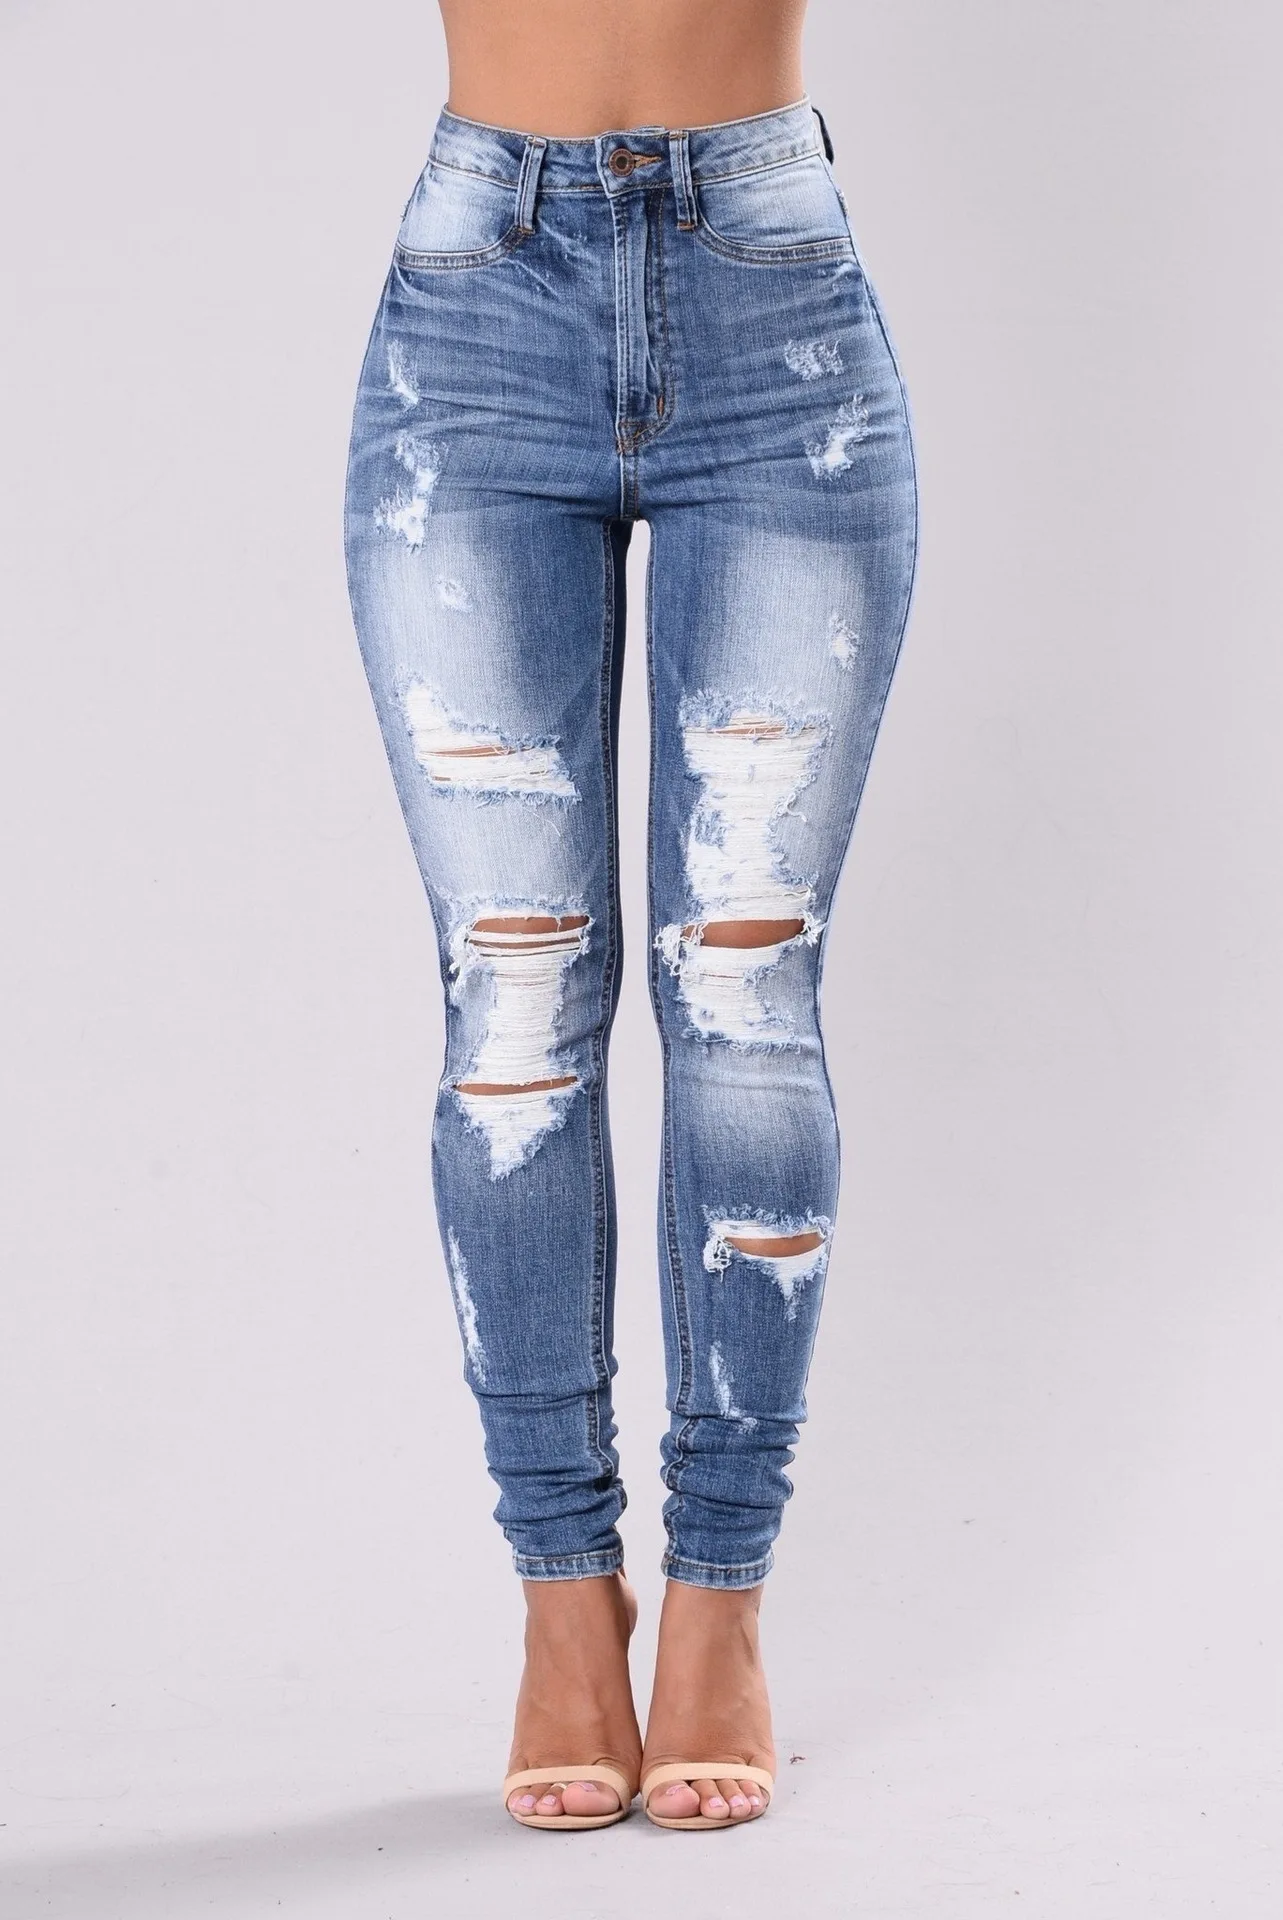 

Ripped Jeans for Women Mid Waist Skinny Pencil Pants Super Stretchy Jeans Female Bleached Washed Hole Denim Trousers